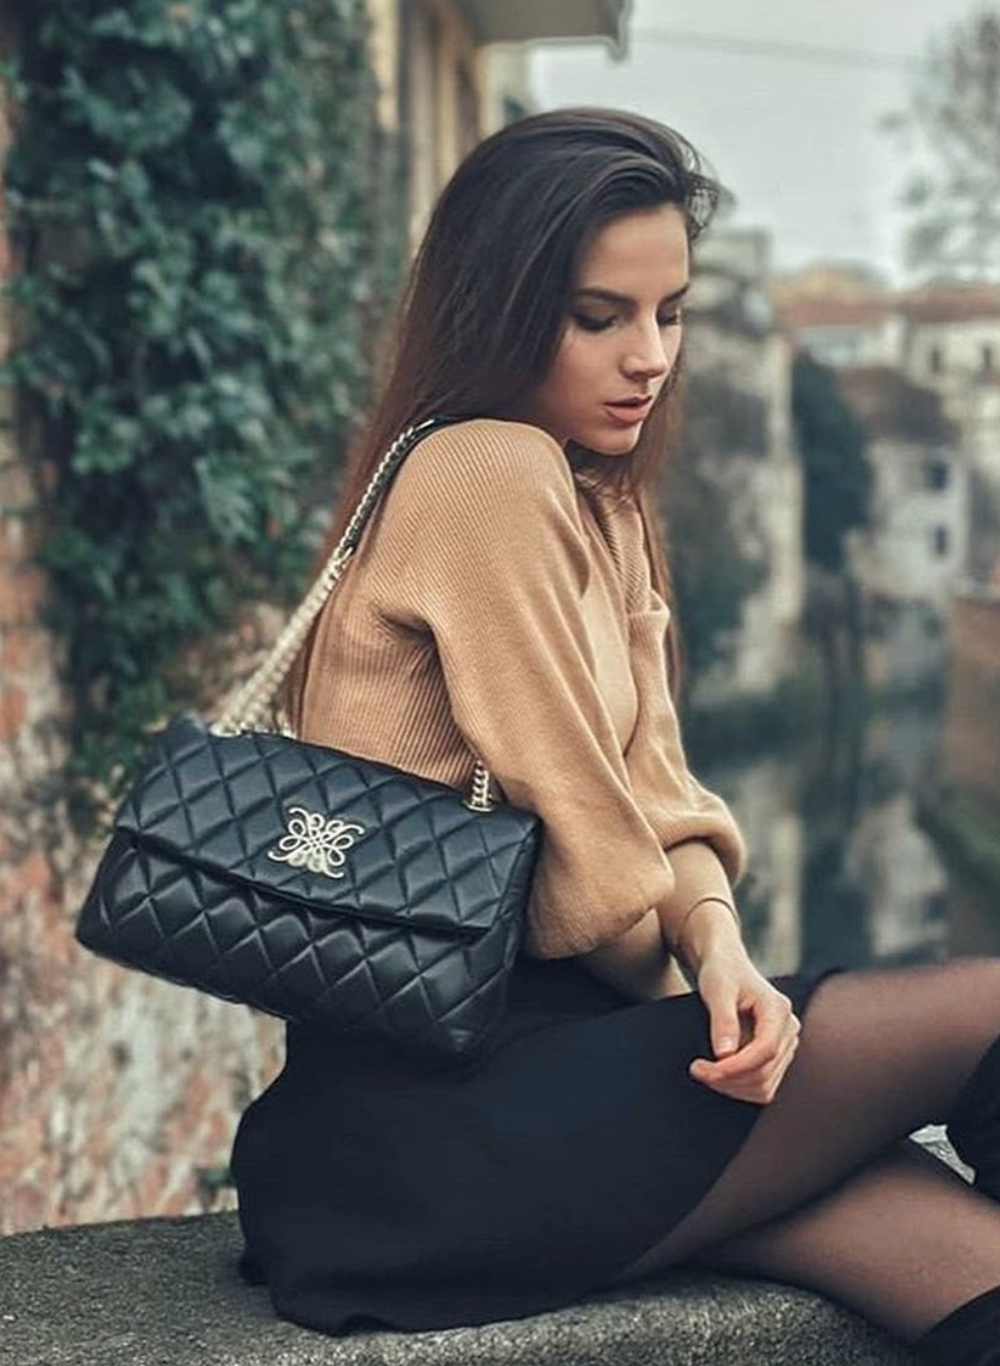 Chantal is an Italian luxury bag Made in Italy by skilled artisans